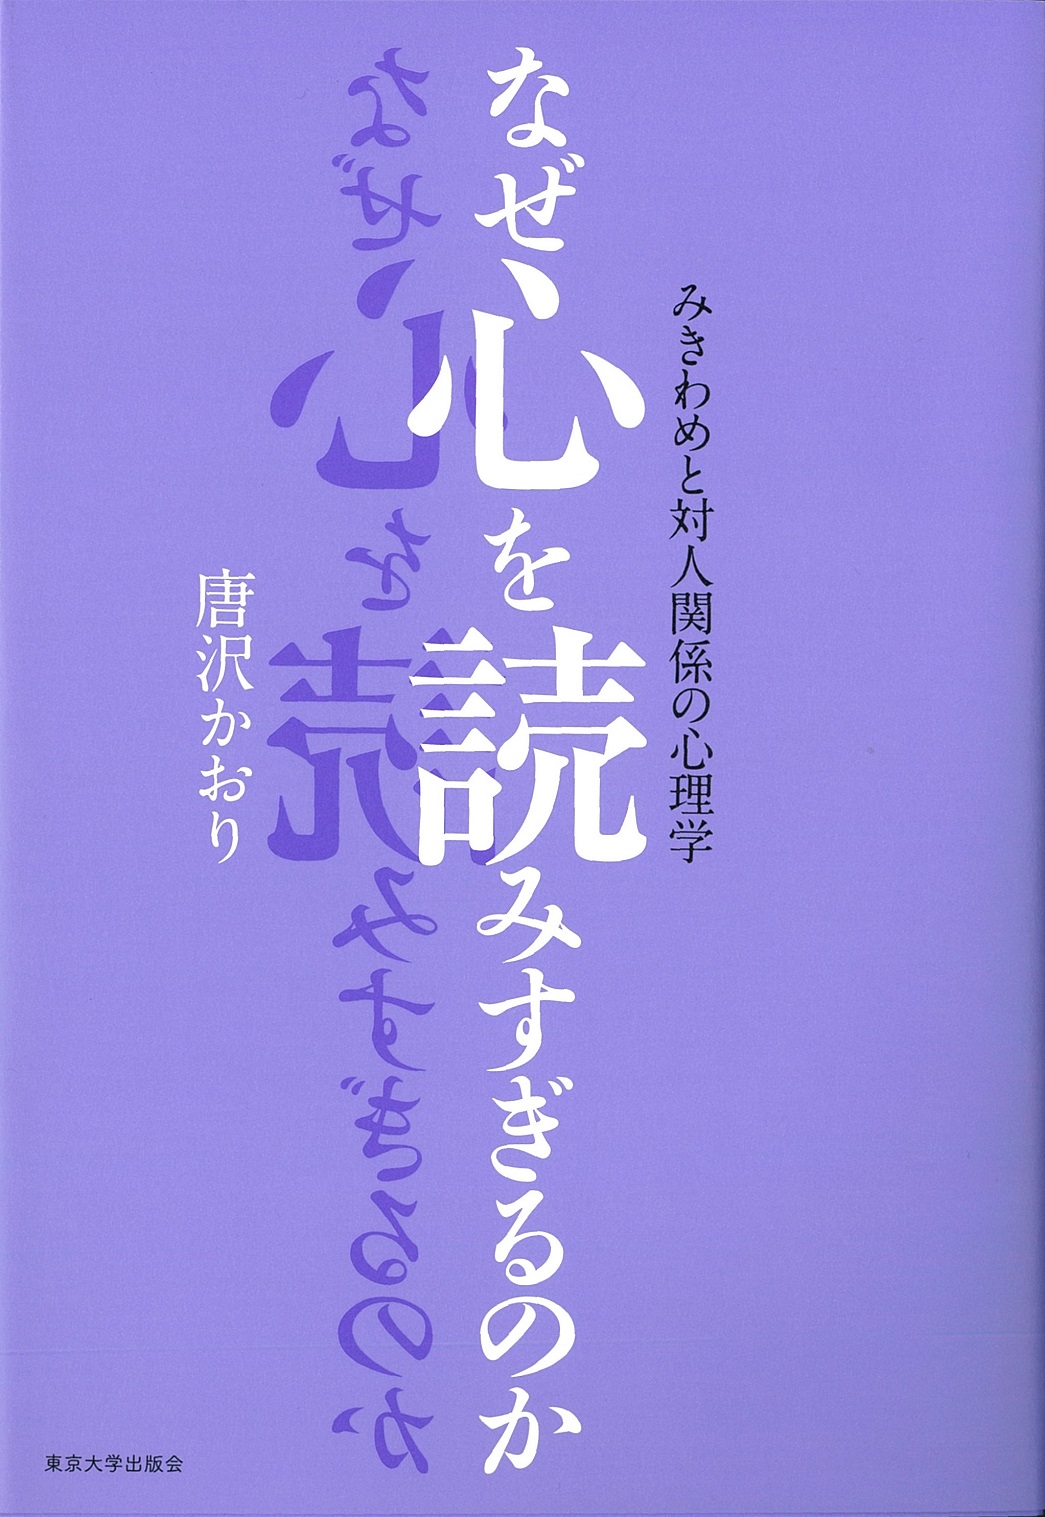 Title and author’s name printed in white on a purple cover